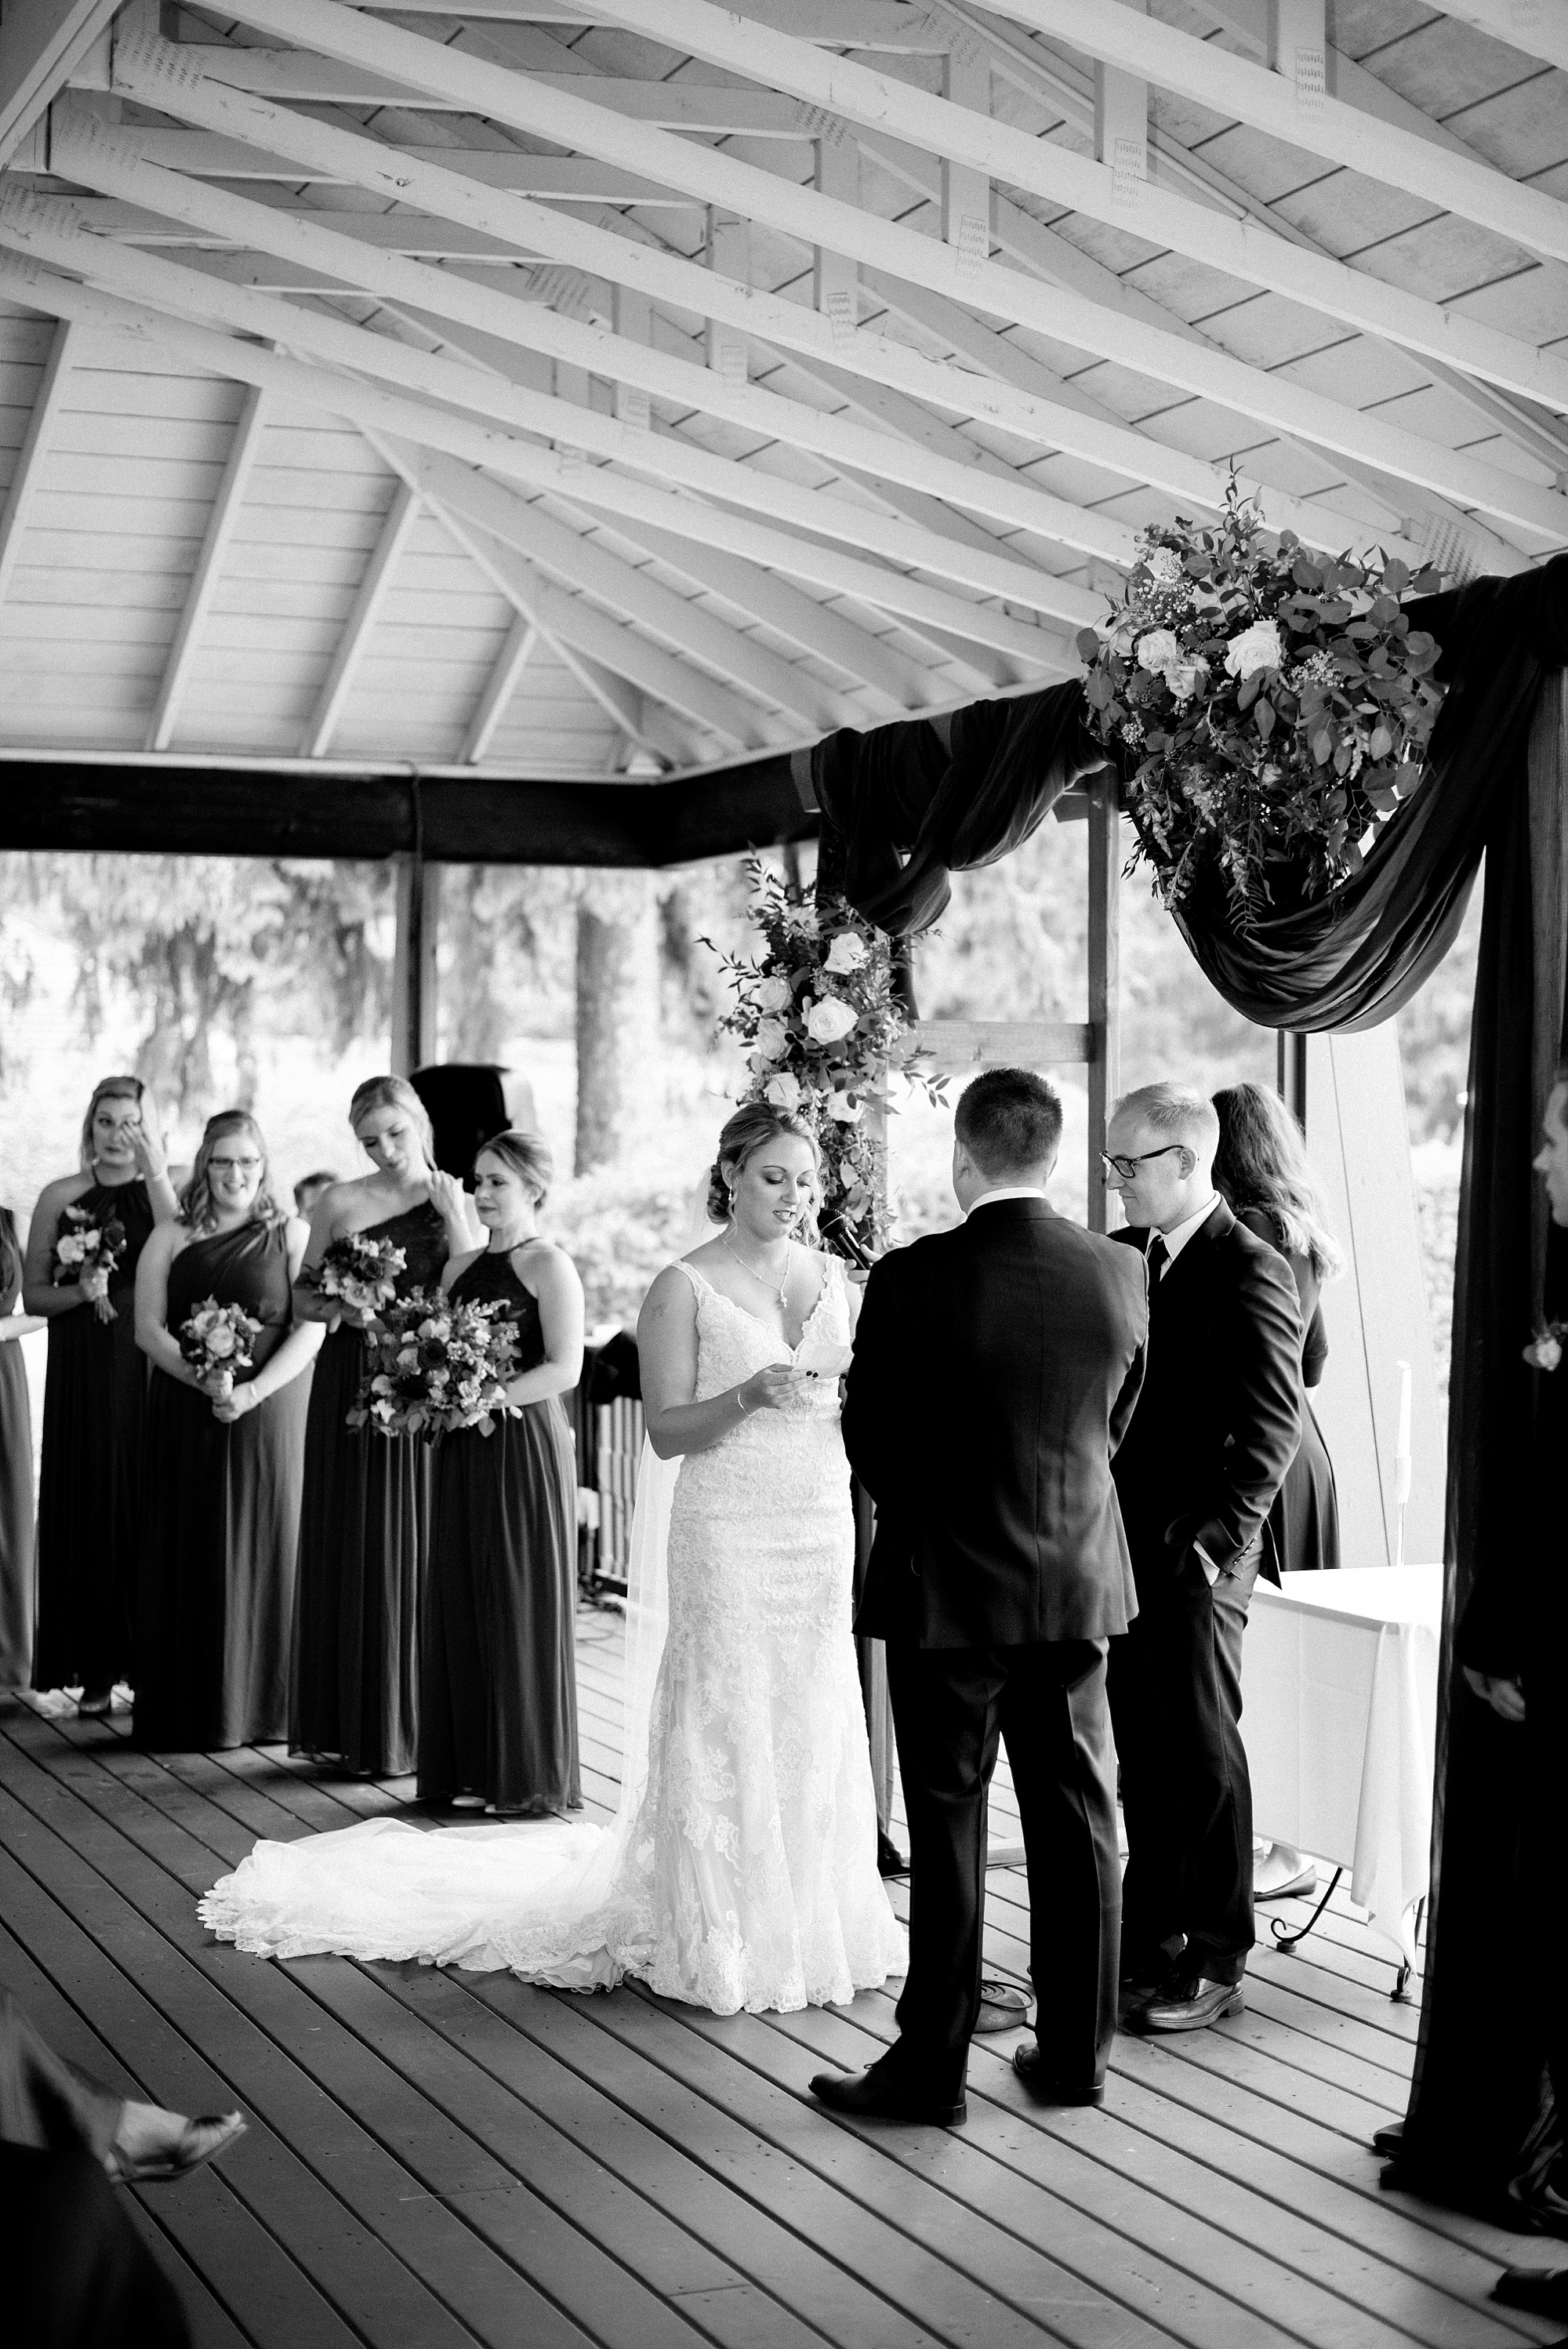 A classic burgundy and navy Fall wedding at the Pine Knob Carriage House in Clarkston, Michigan by Breanne Rochelle Photography.